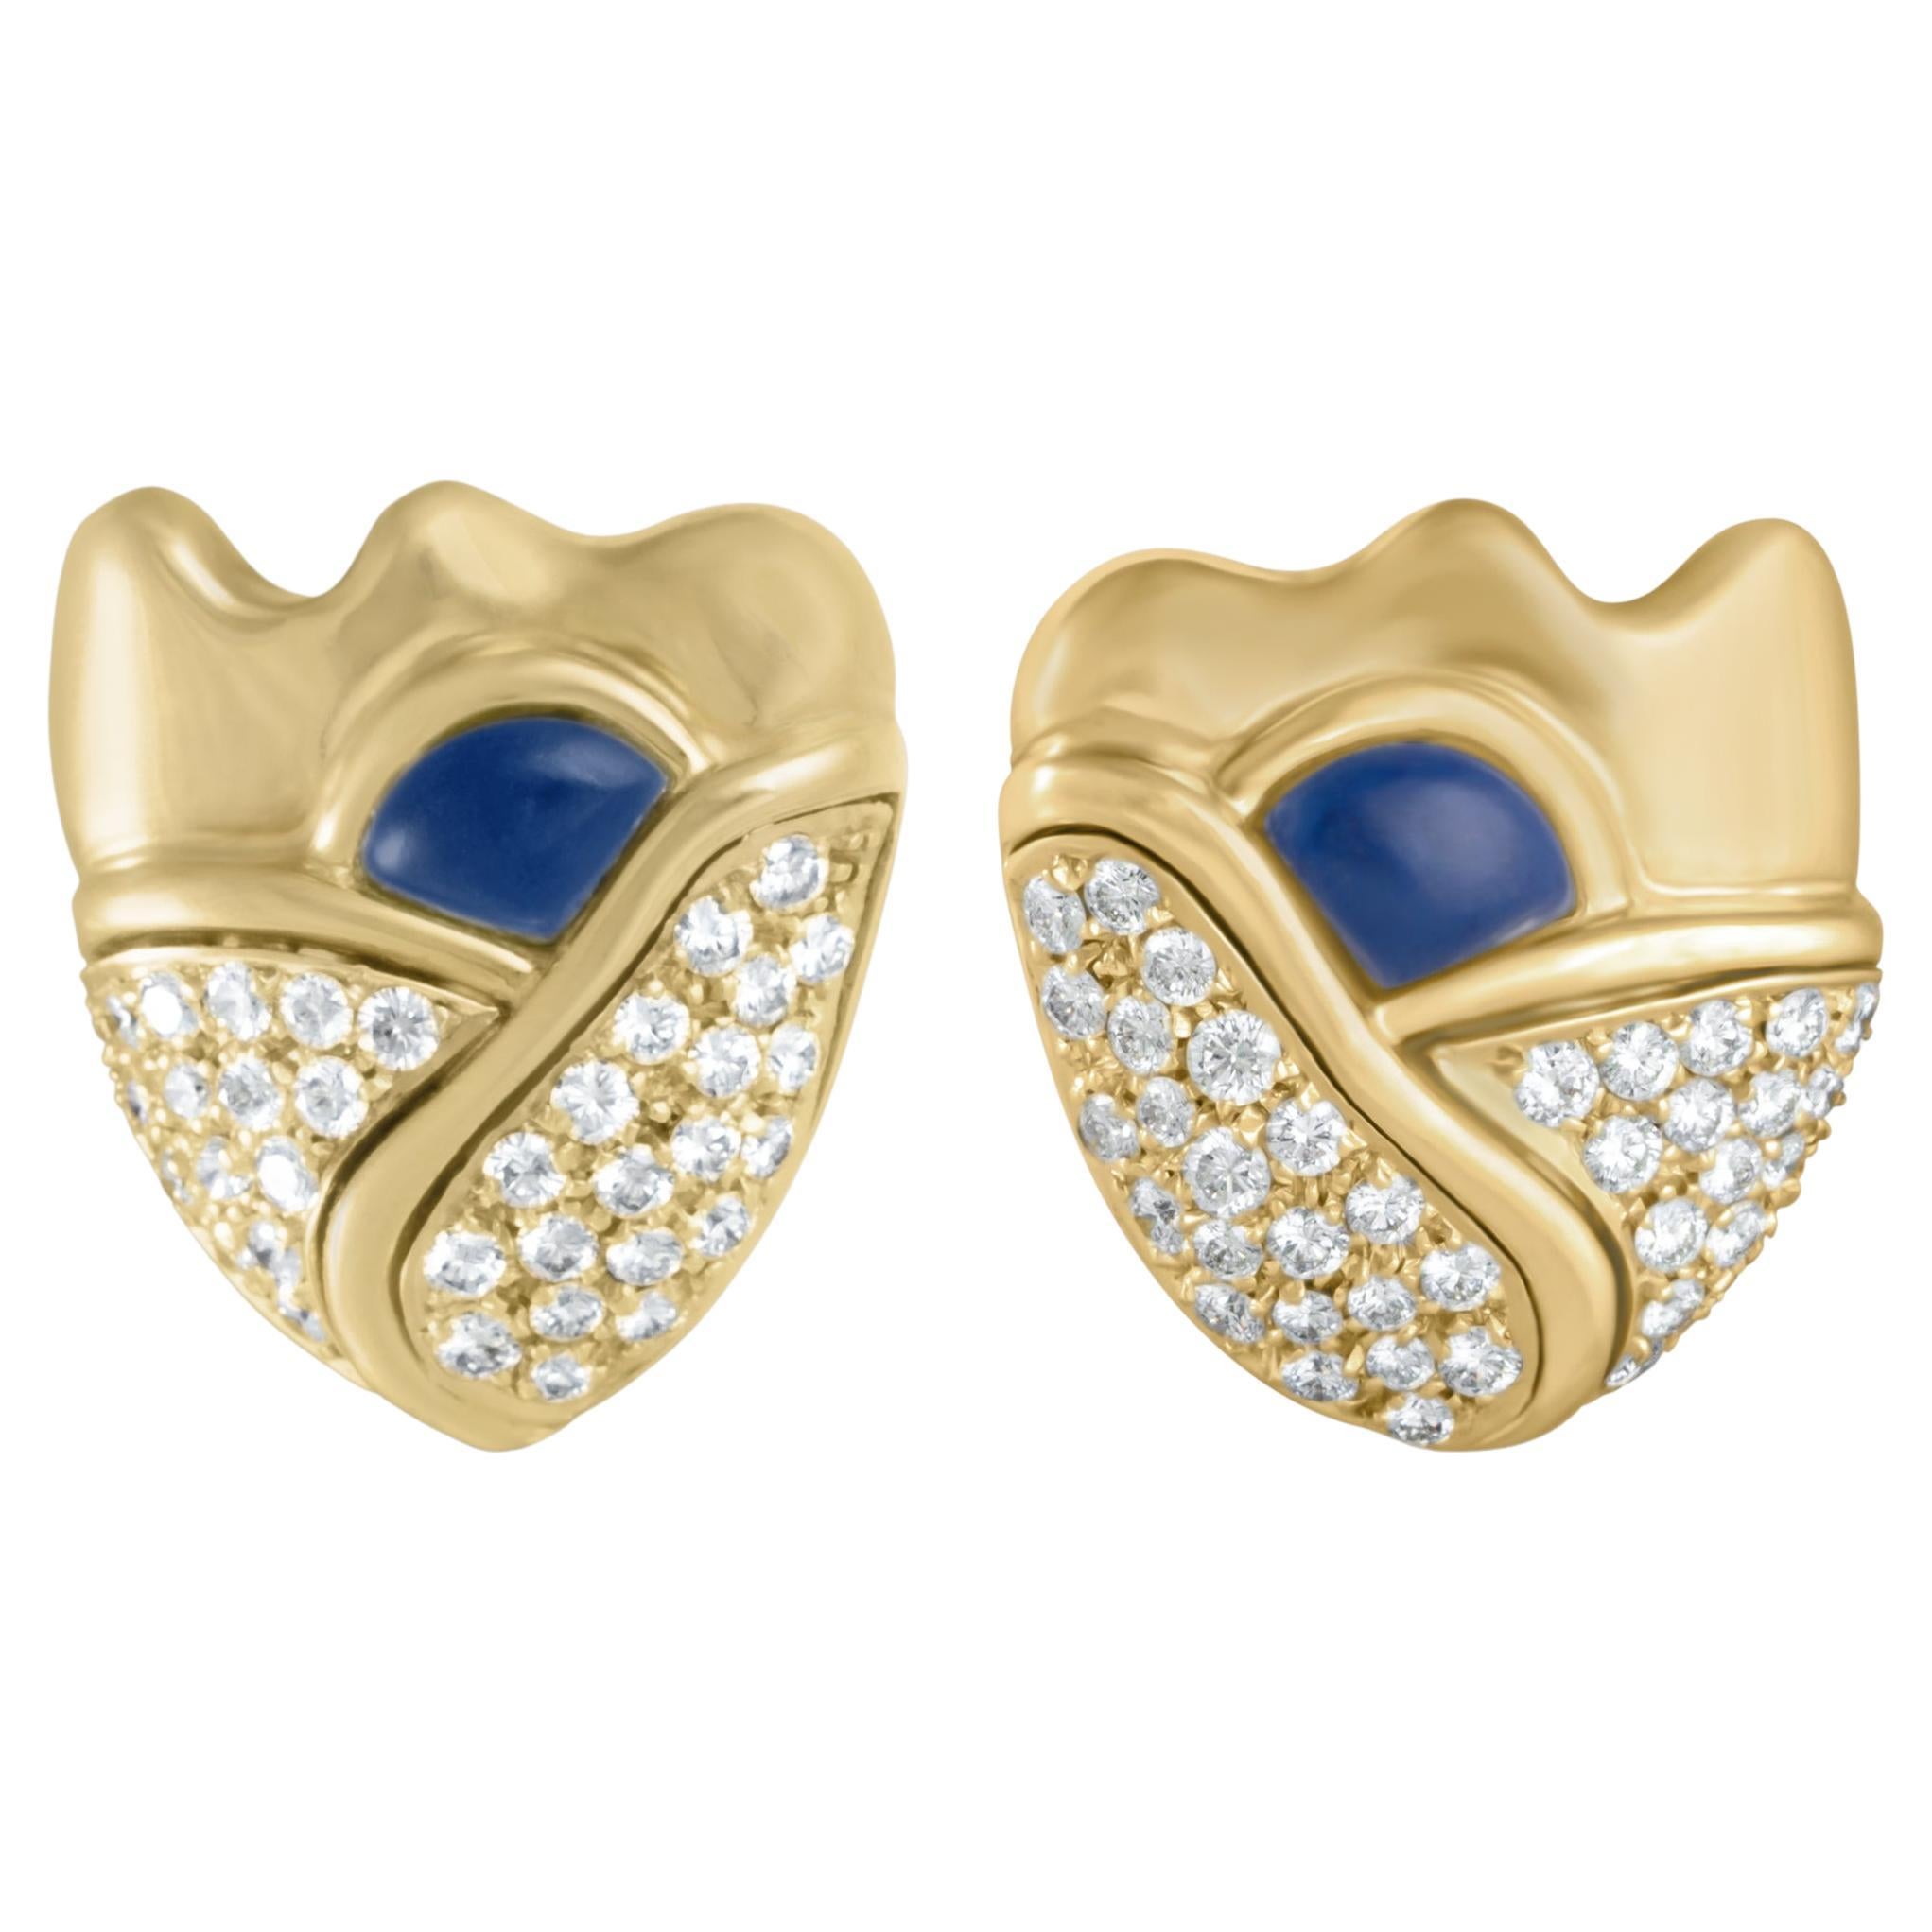 IGI Certified Lily of the Valley Gold & Diamond Flower Stud Earrings with Lapis For Sale